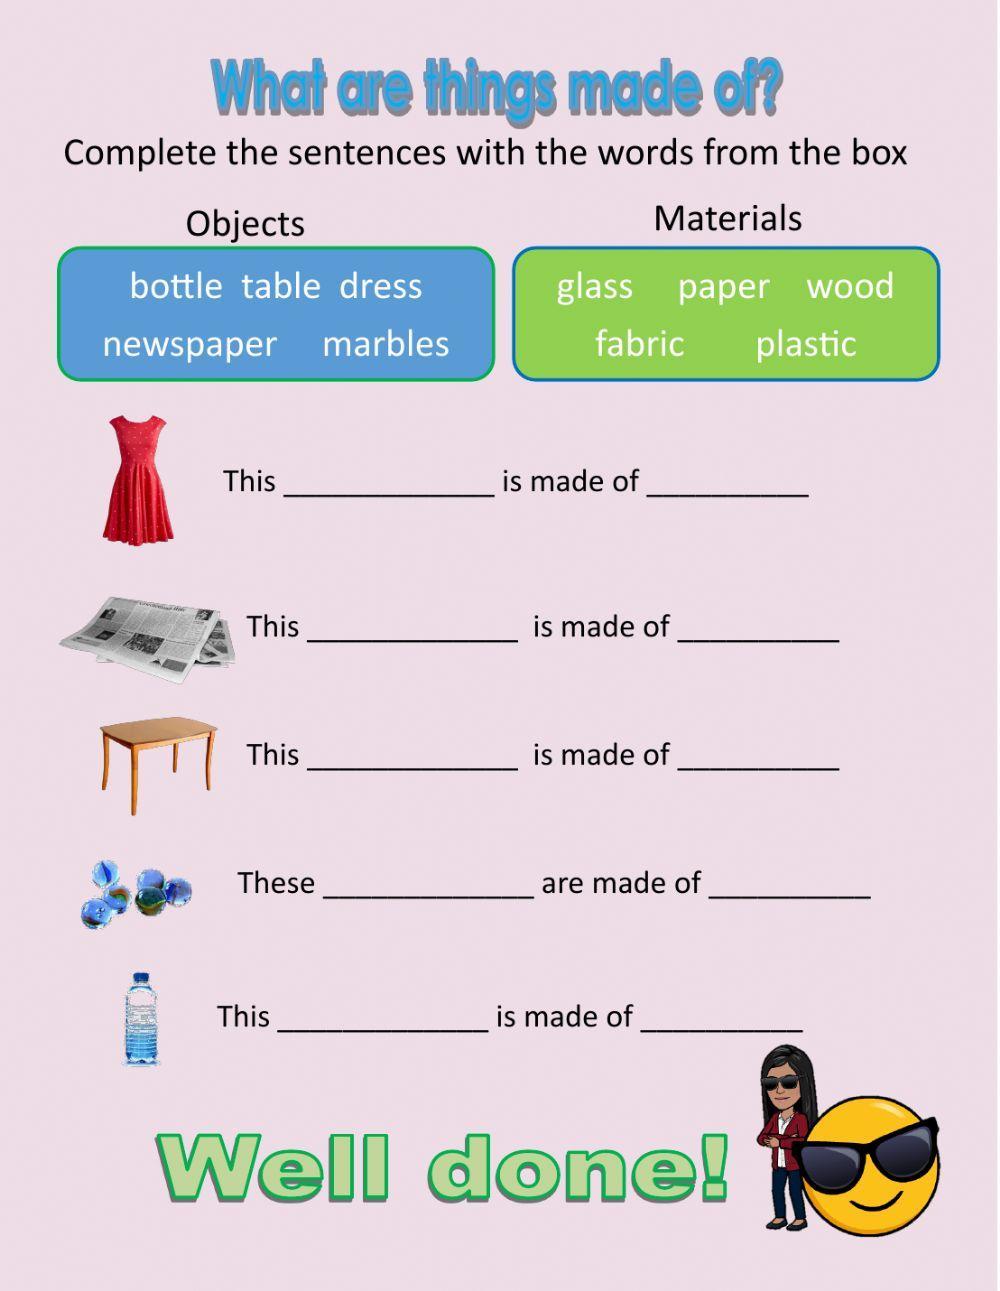 What are things made of? worksheet | Live Worksheets